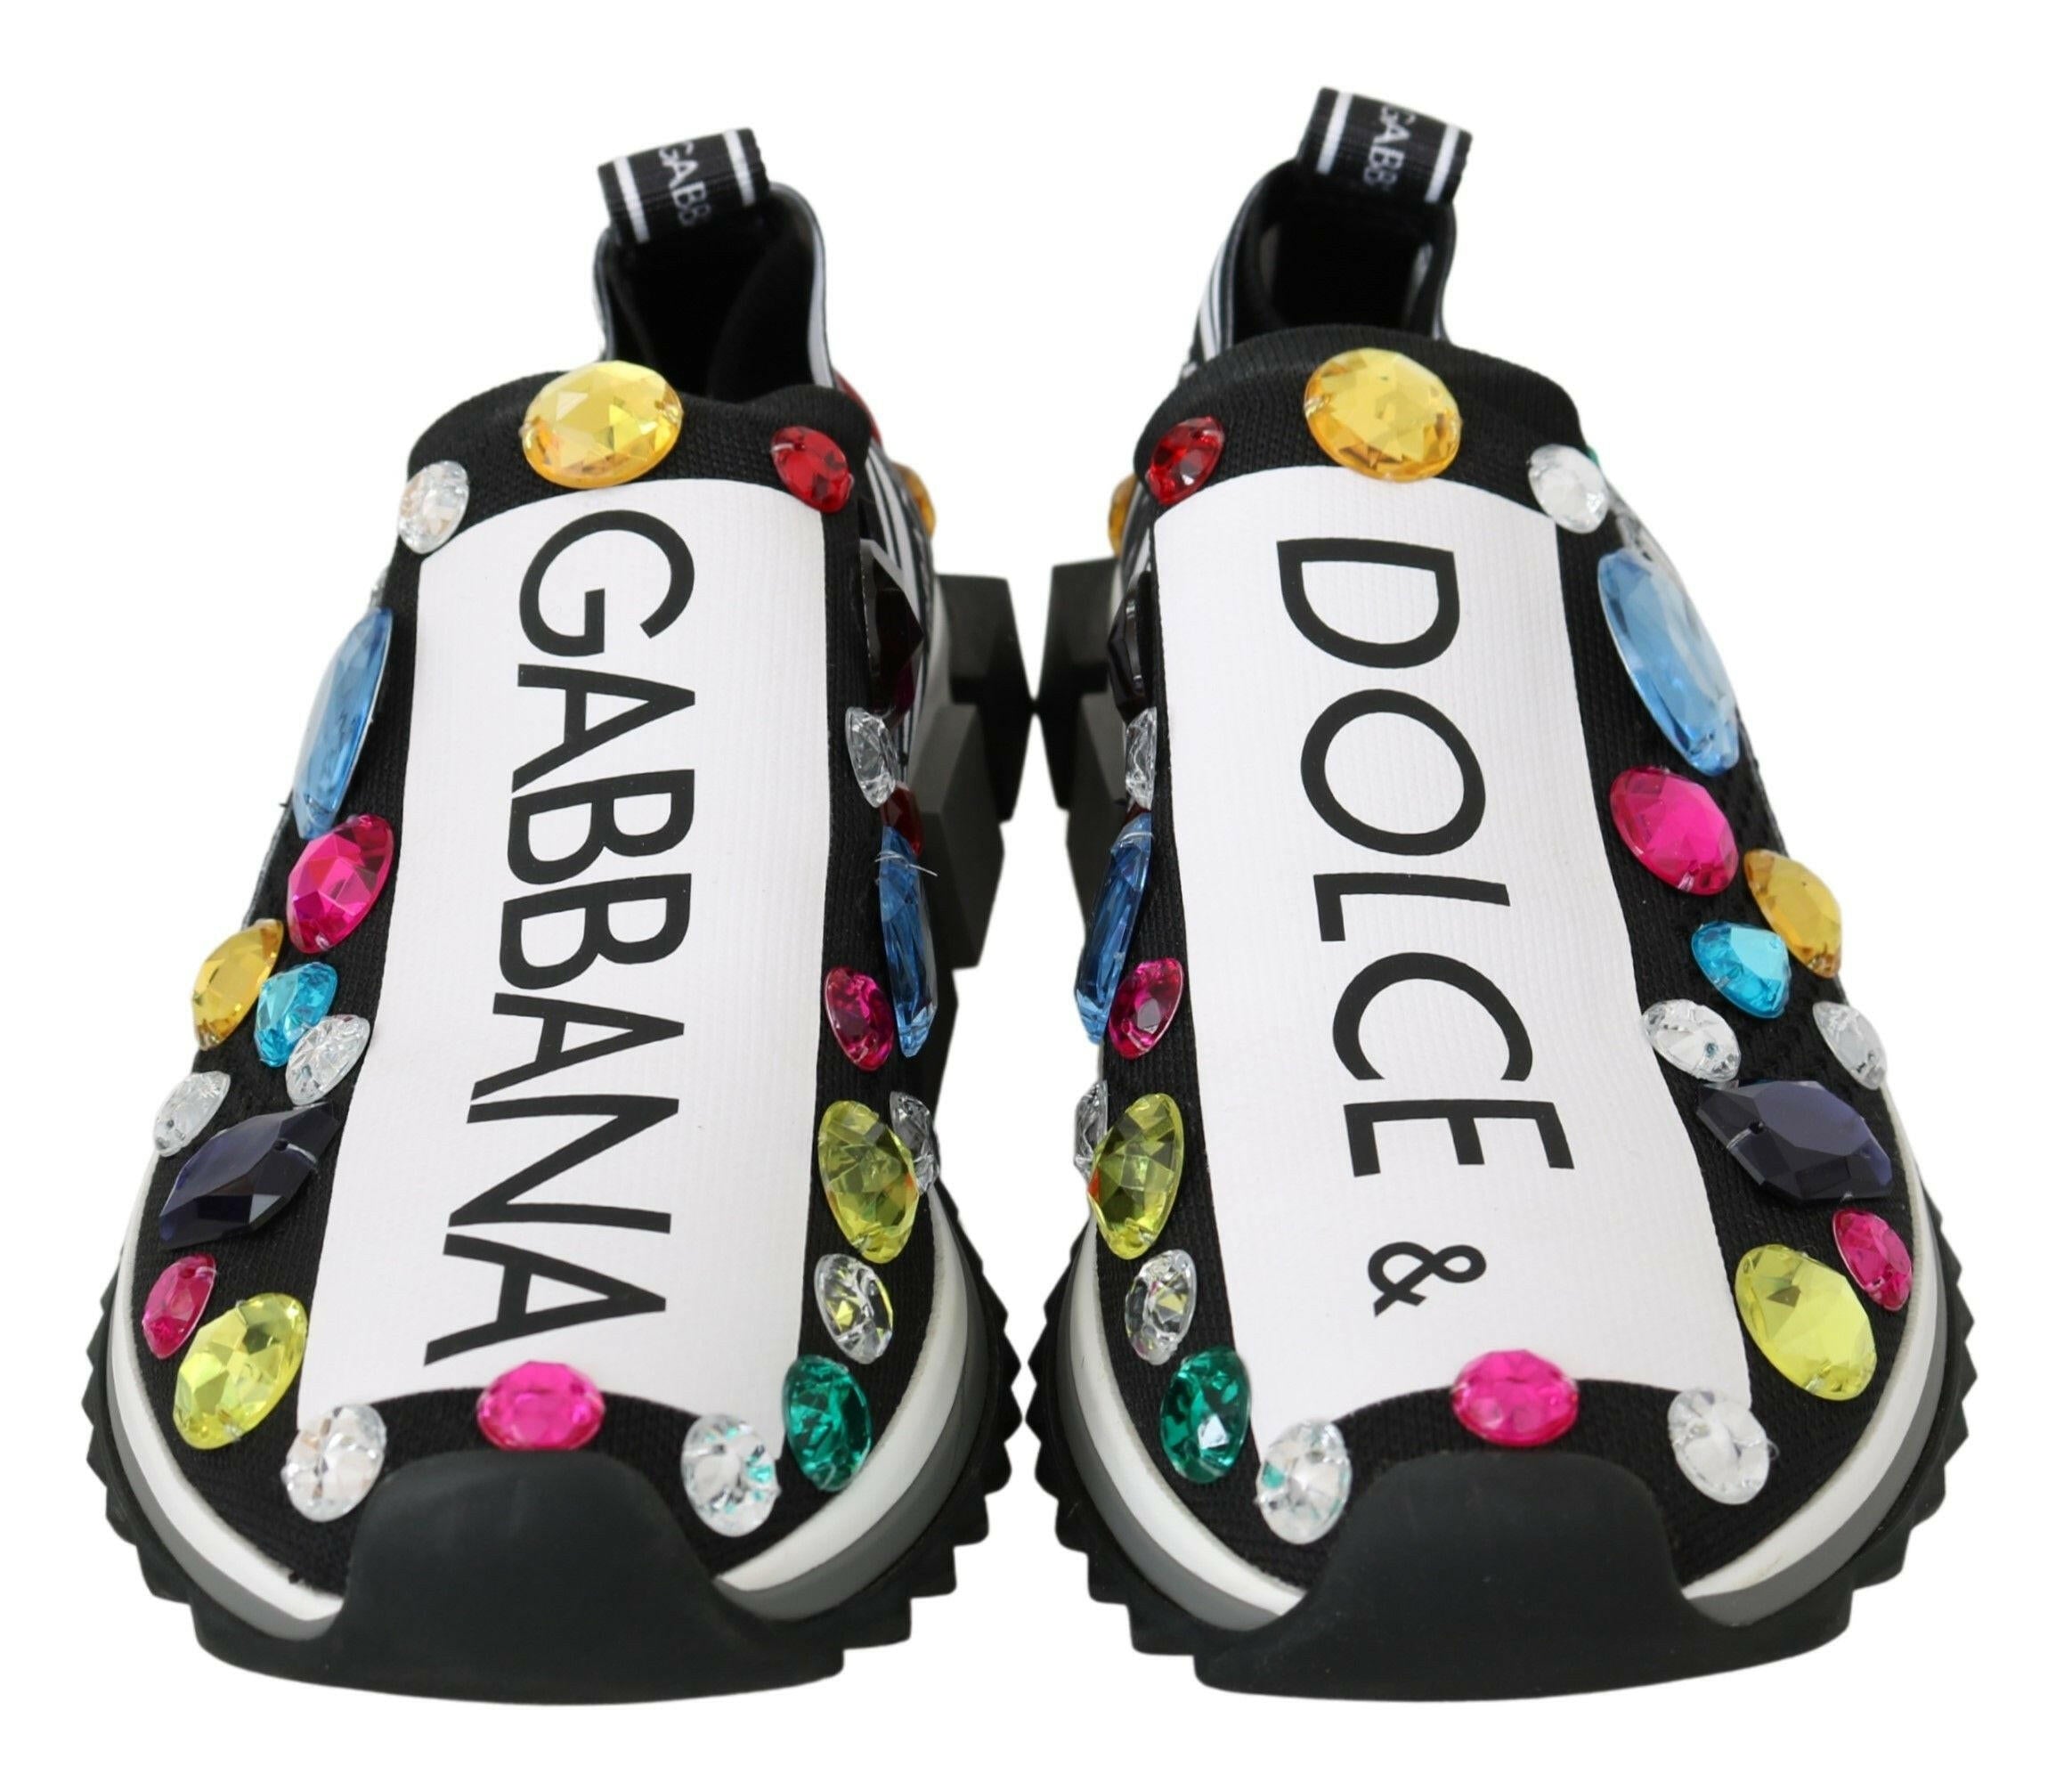 Dolce & Gabbana Black Multicolor Crystal Sneakers Shoes - GENUINE AUTHENTIC BRAND LLC  